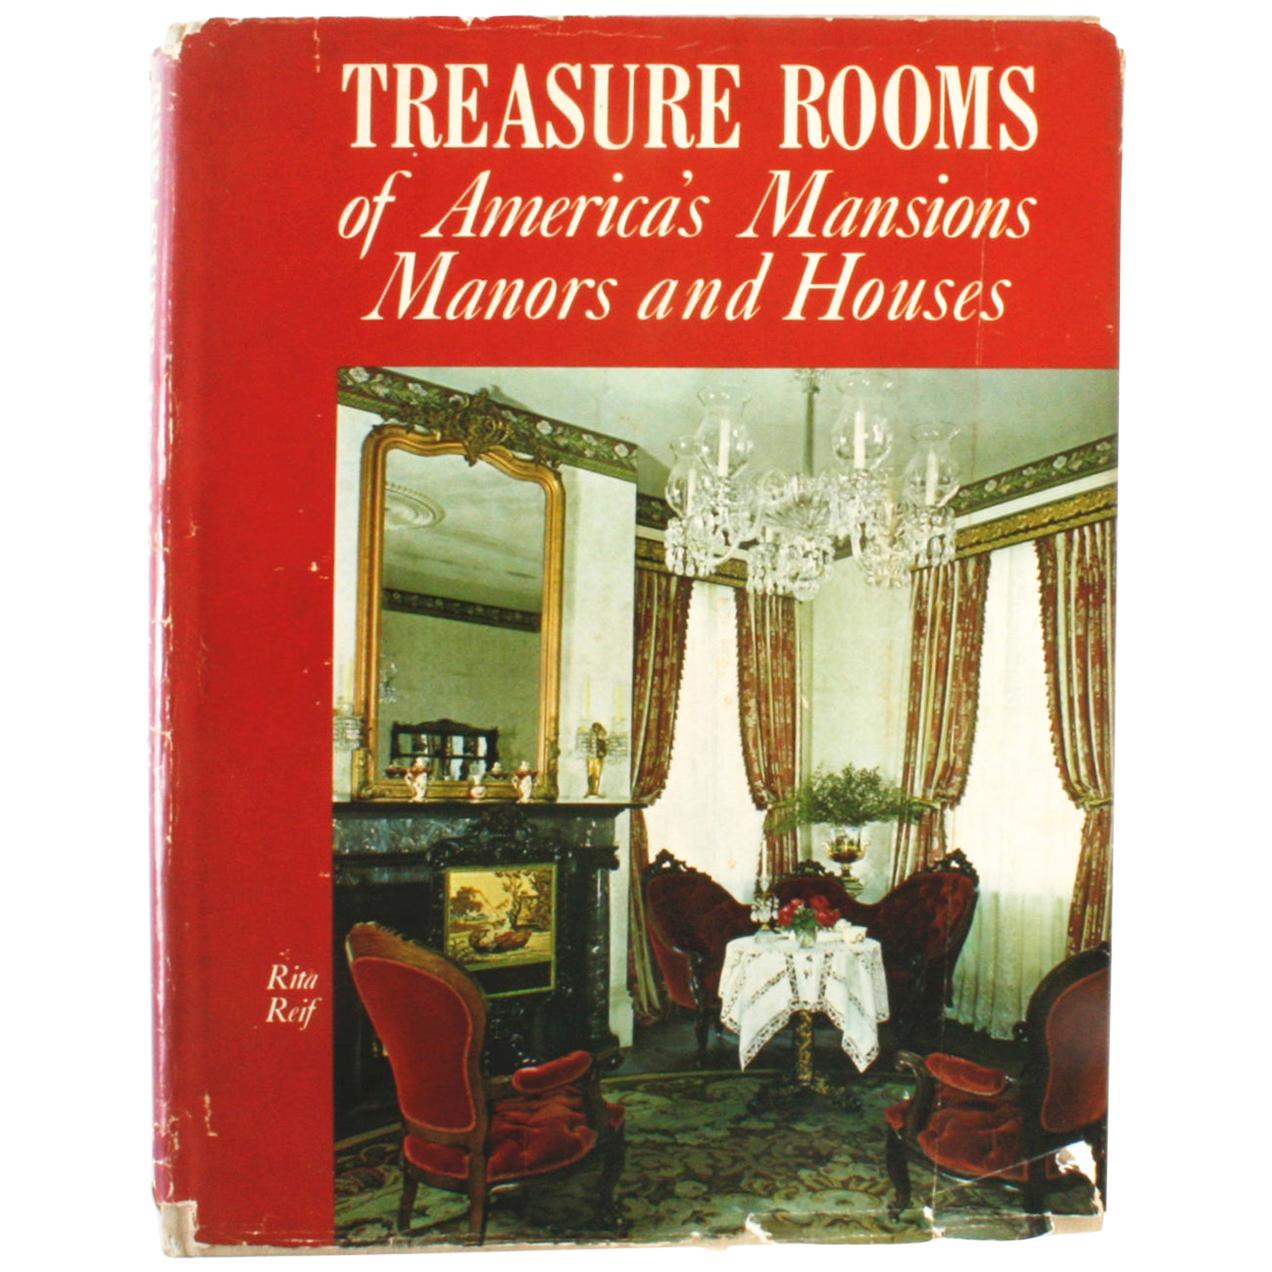 Treasure Rooms of America's Mansions Manors and Houses by Rita Reif, 1st Ed